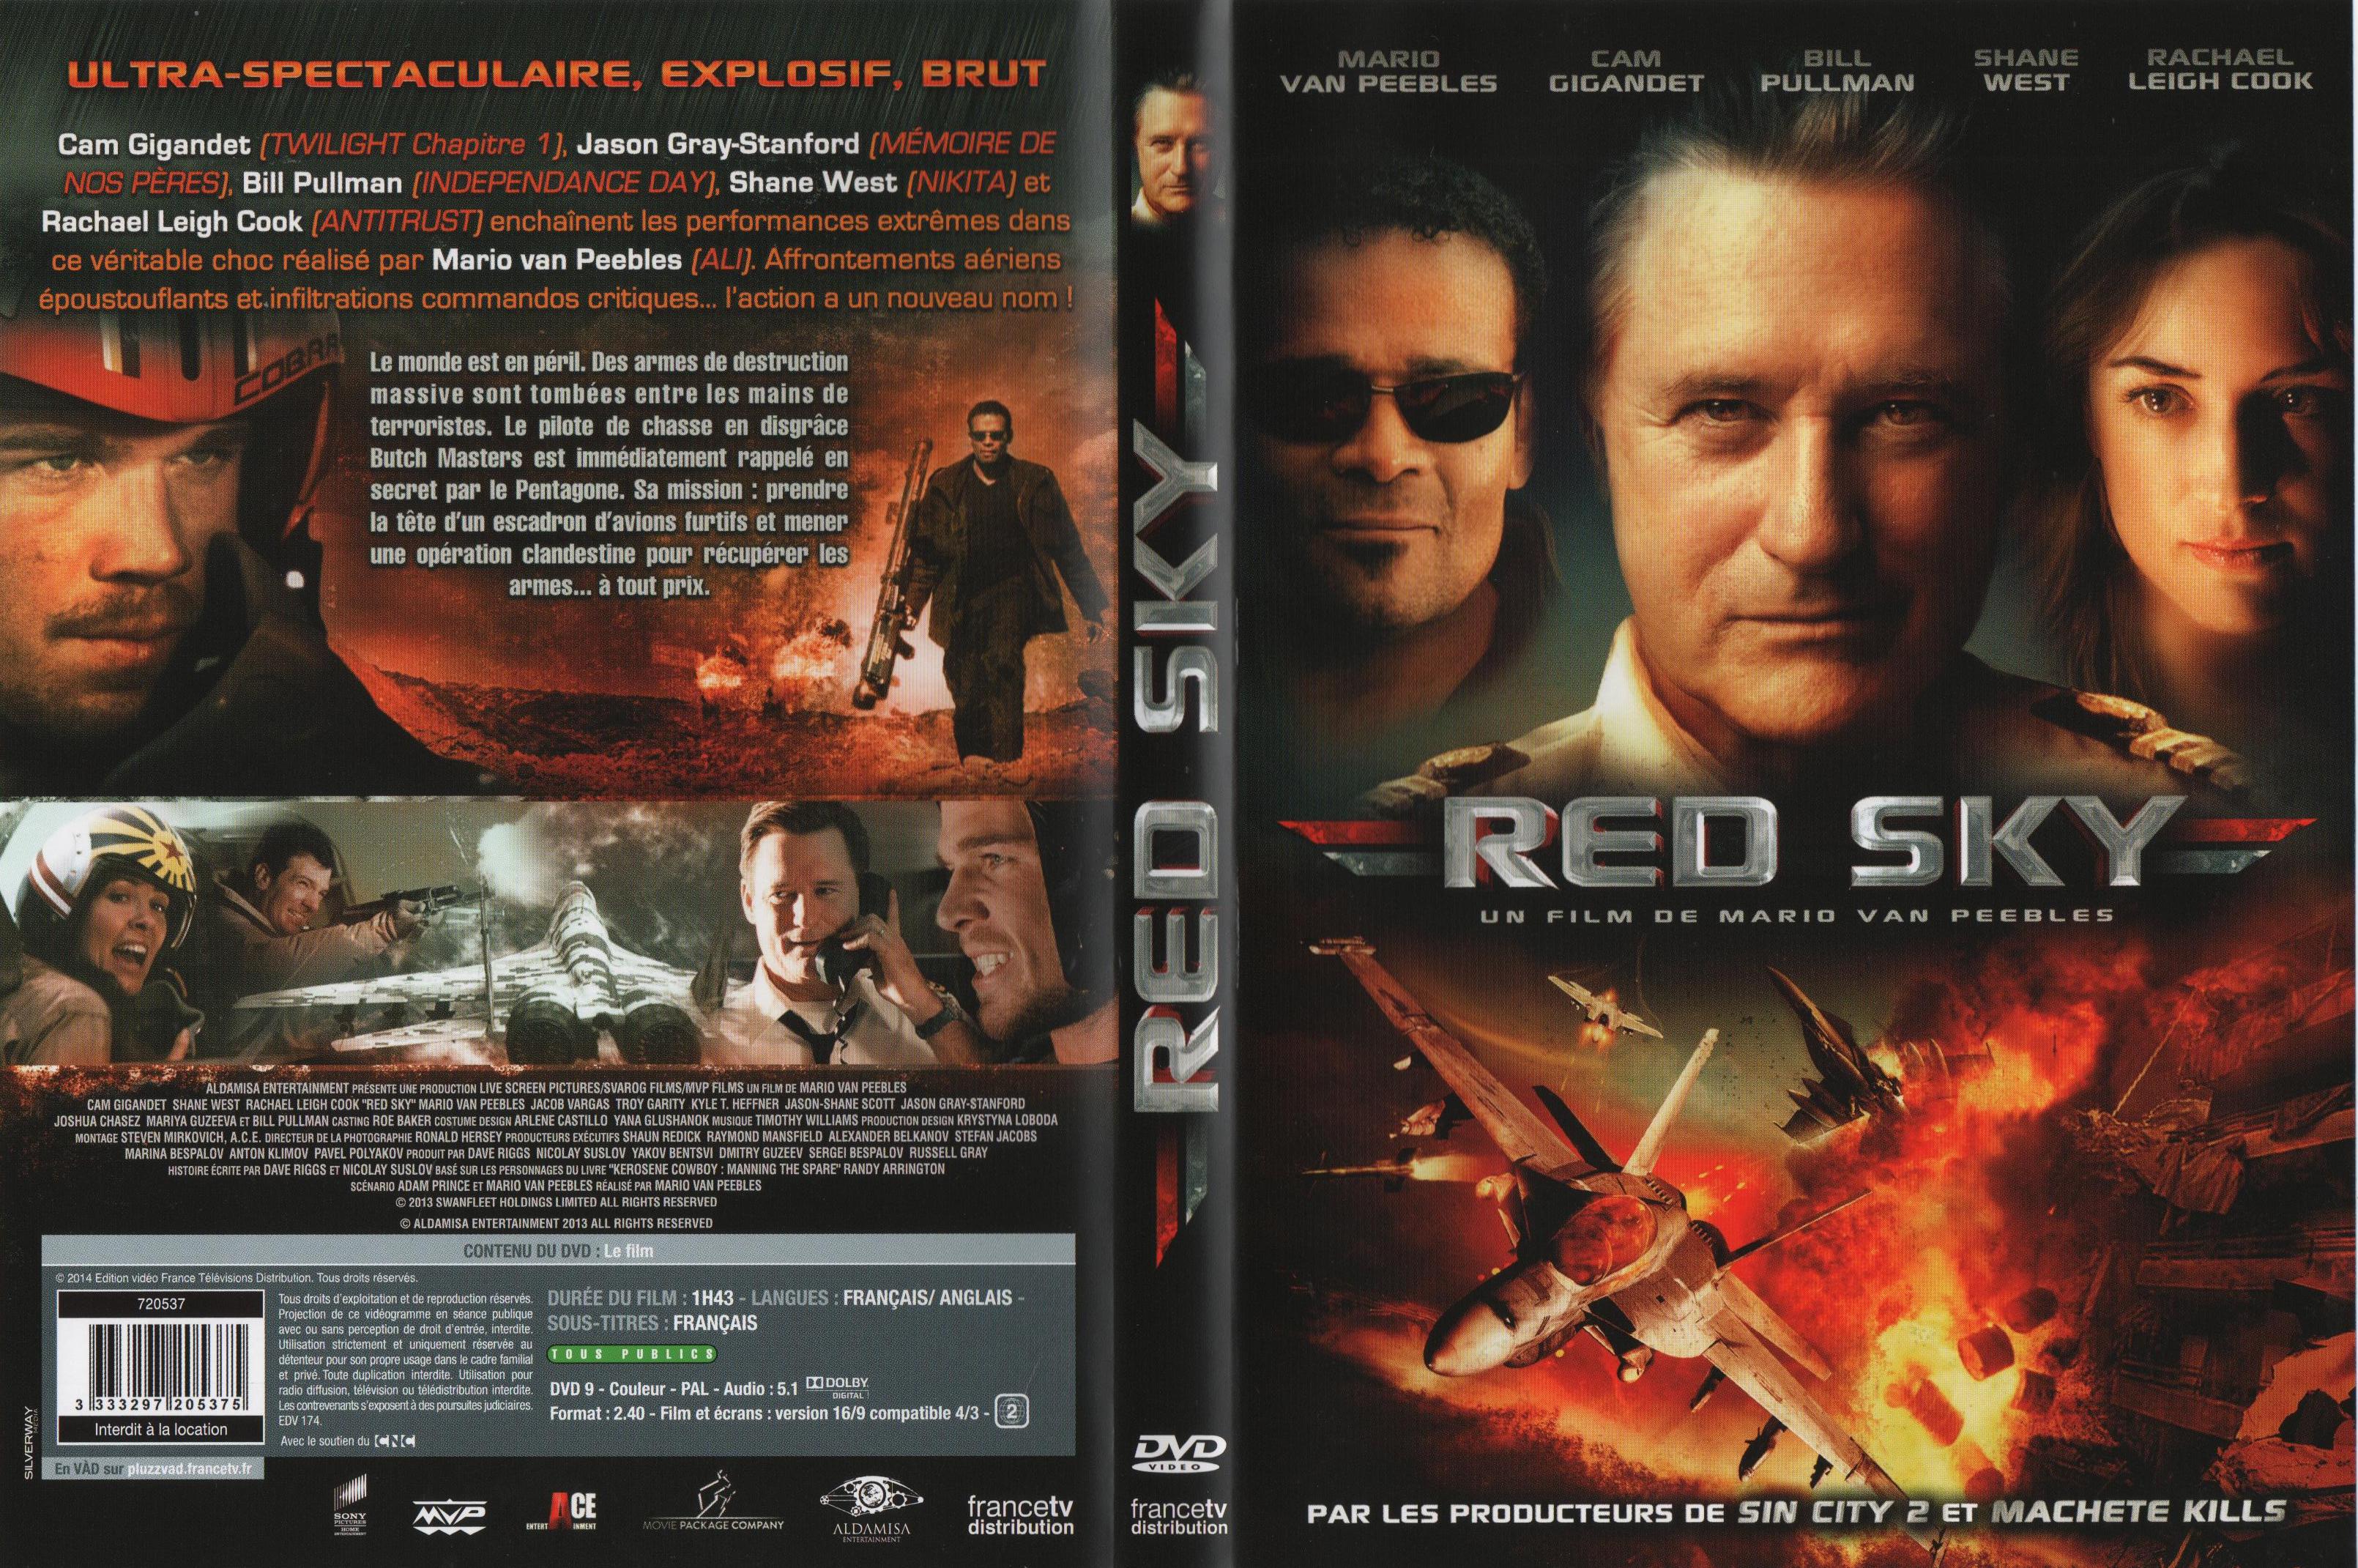 Jaquette DVD Red sky